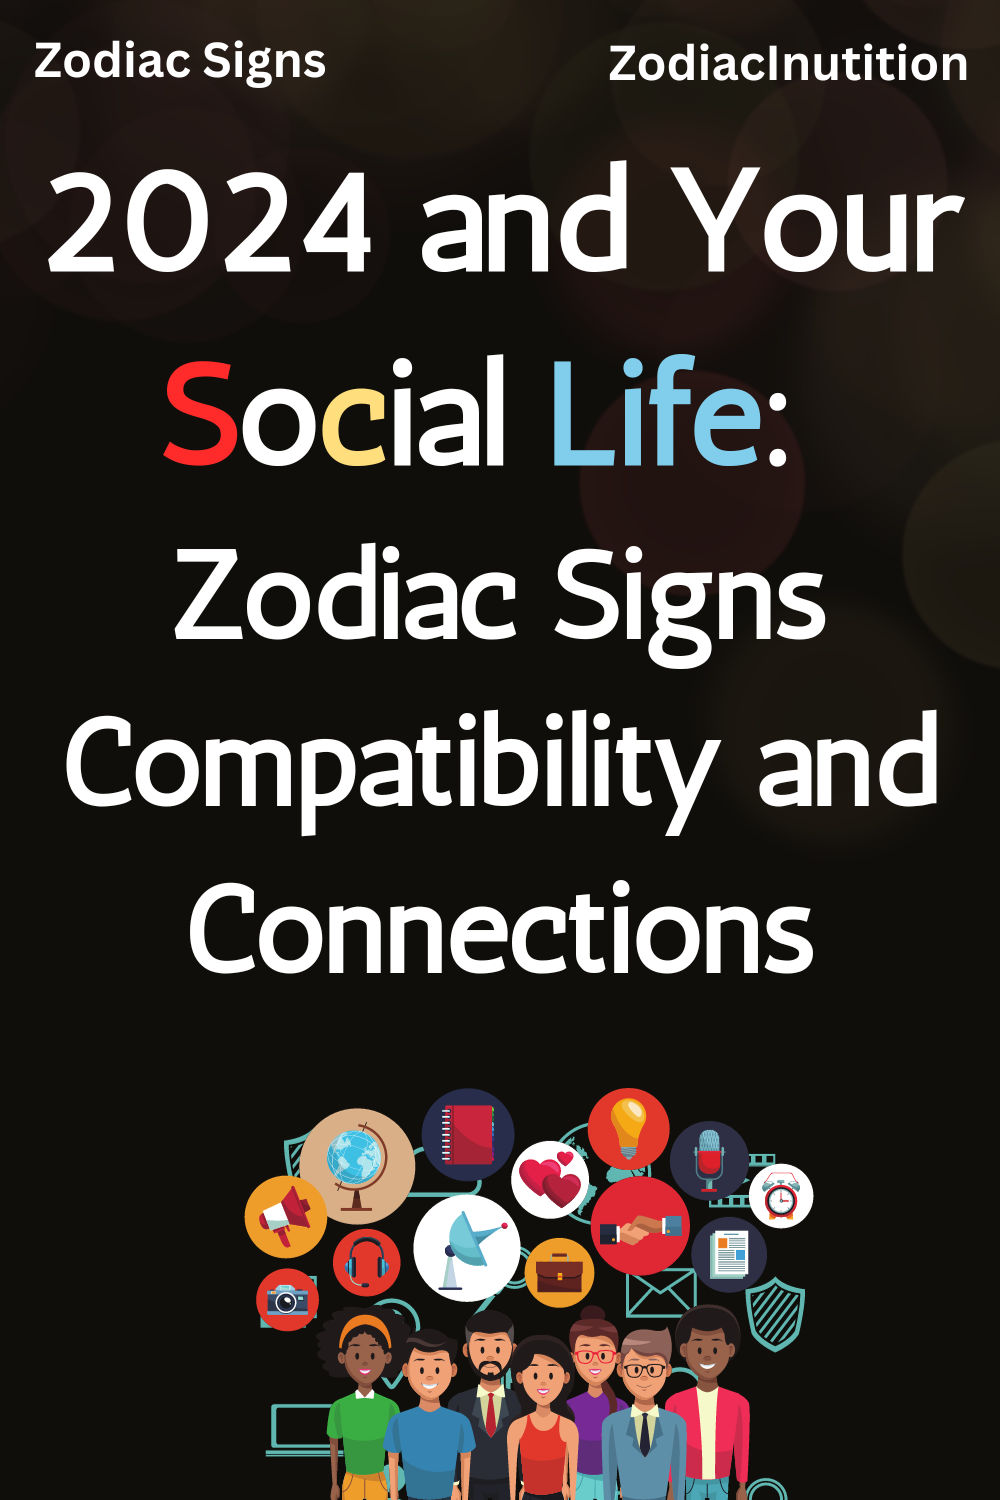 2024 and Your Social Life: Zodiac Signs Compatibility and Connections